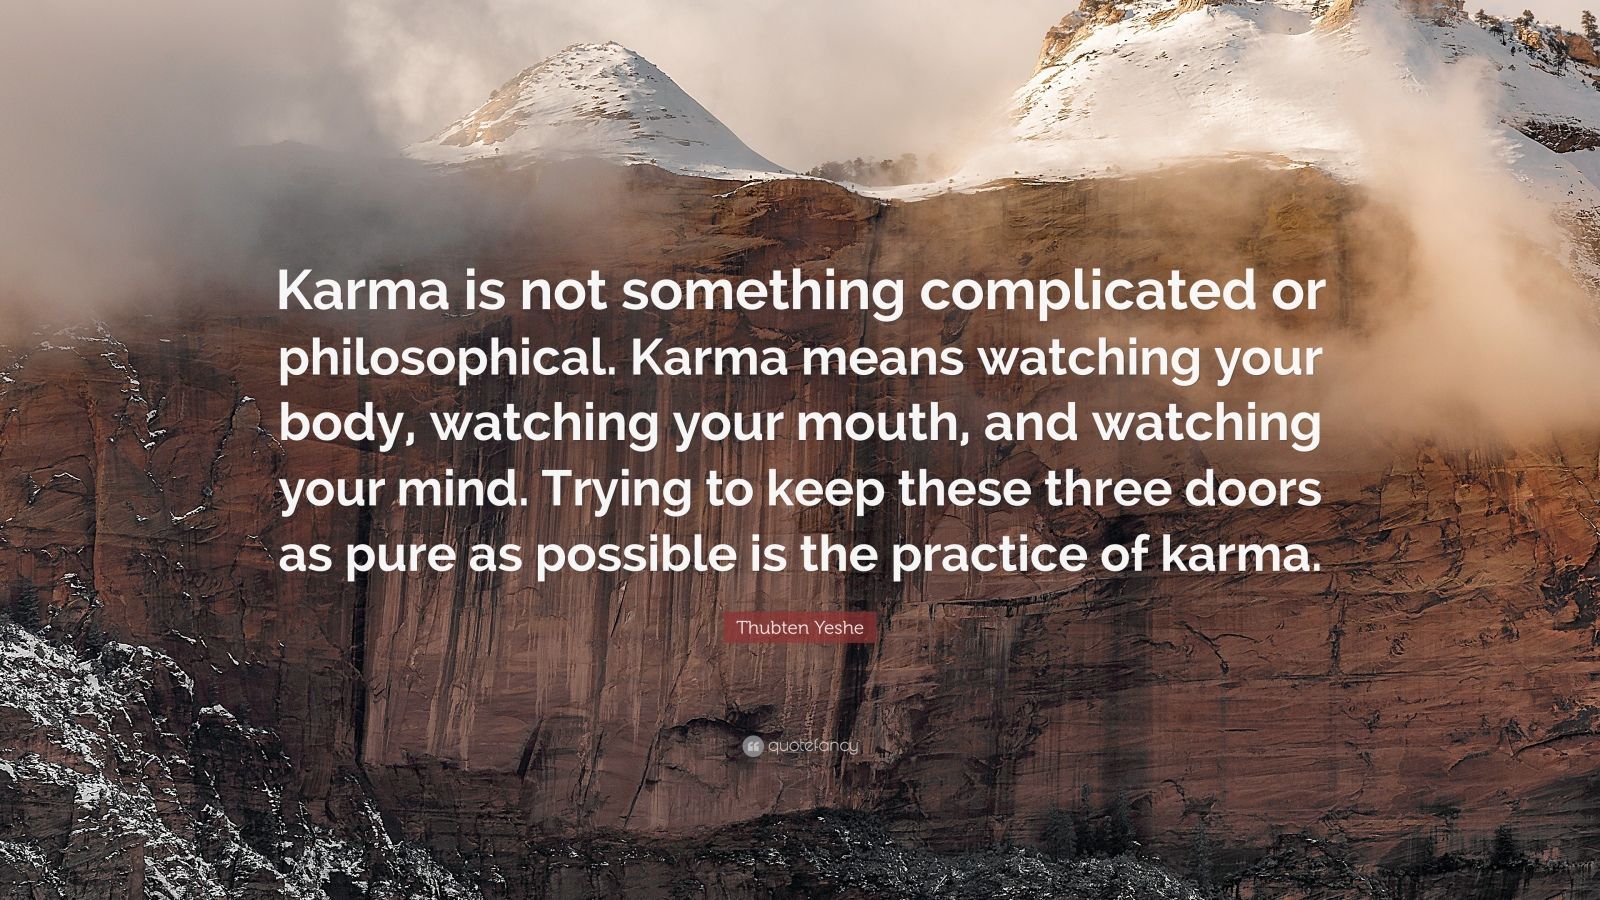 Thubten Yeshe Quote: “Karma is not something complicated or philosophical. Karma means watching your body, watching your mouth, and watching y.” (12 wallpaper)